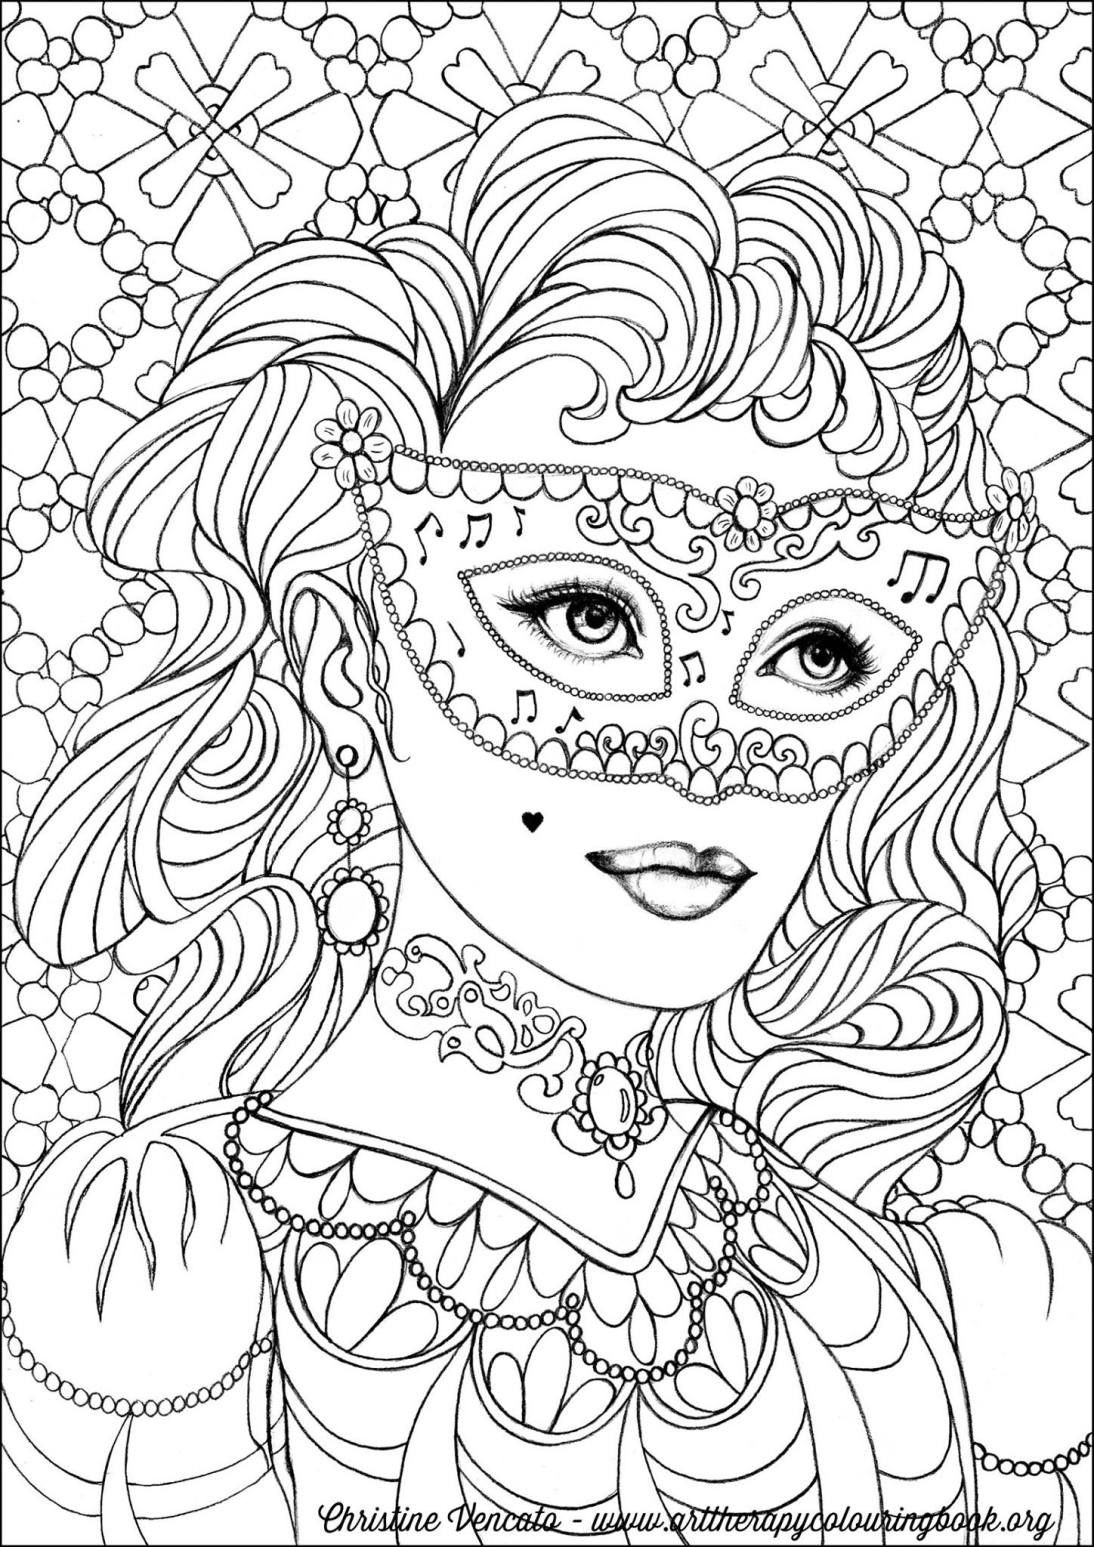 Adult Coloring Pages For Free
 Free Coloring Page From Adult Coloring Worldwide Art by